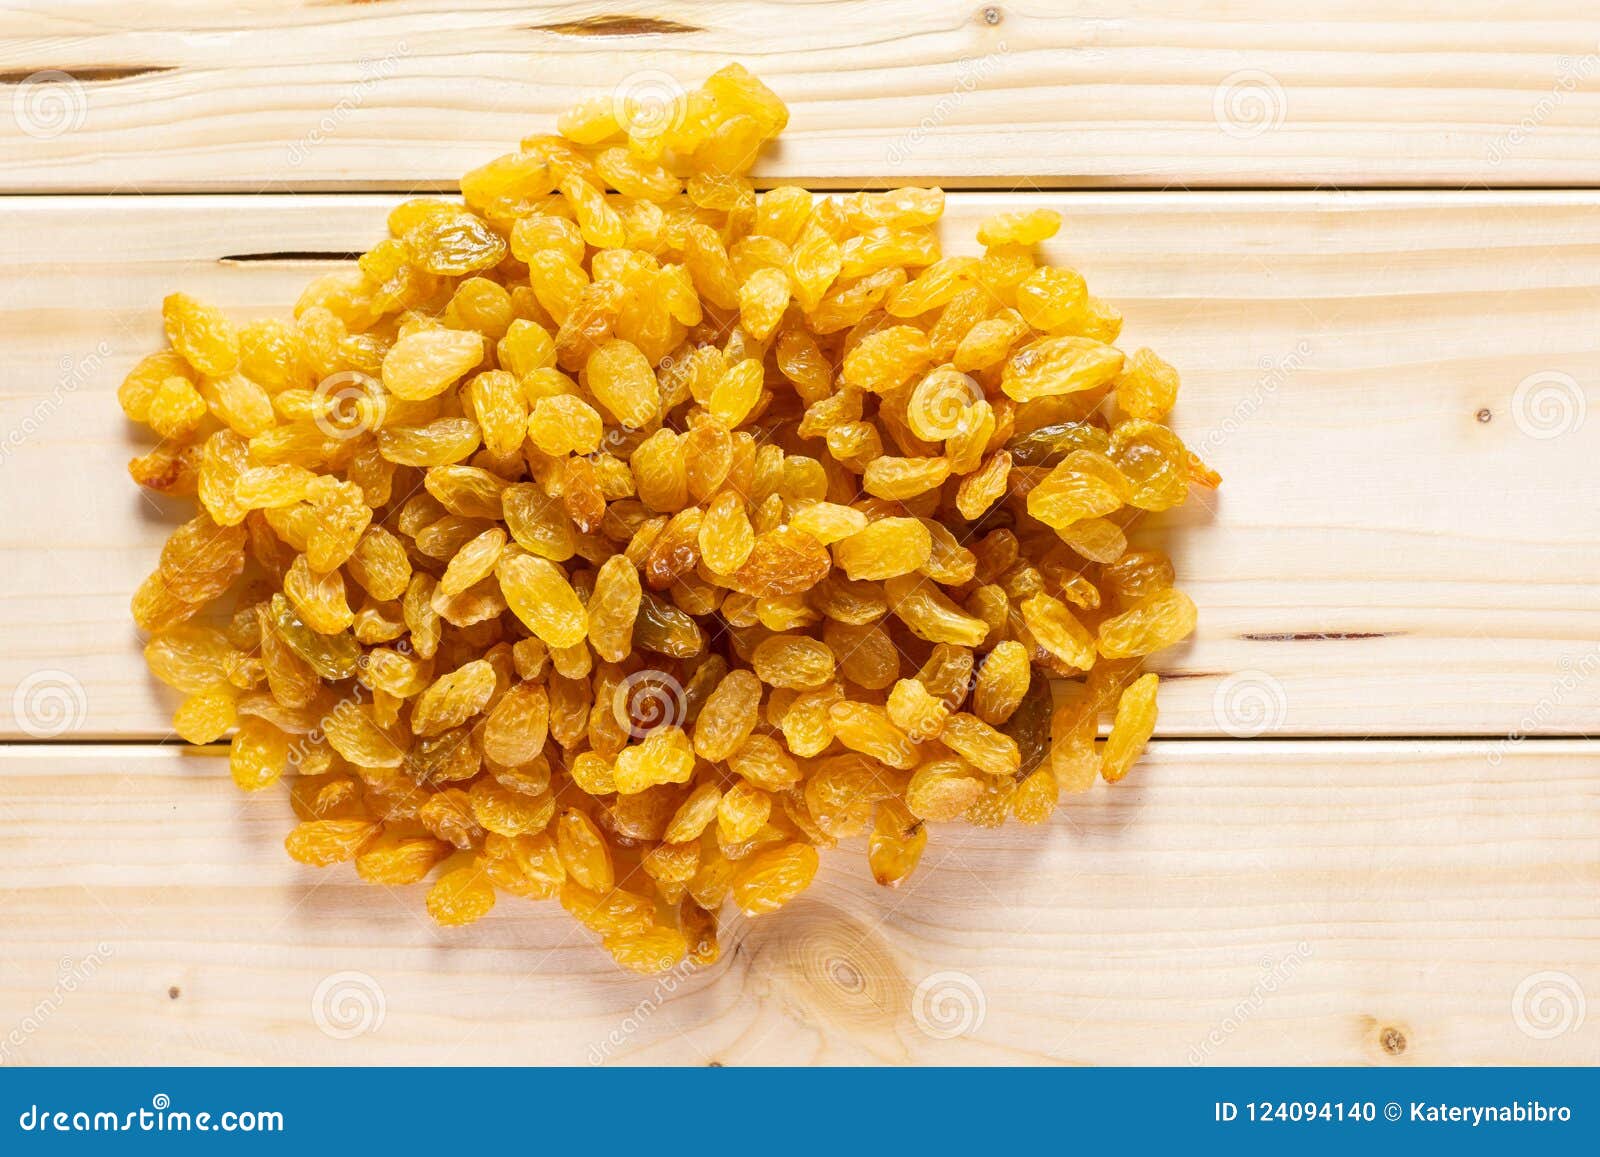 Dry Golden Raisins Sultana on Natural Wood Stock Photo - Image of heap ...